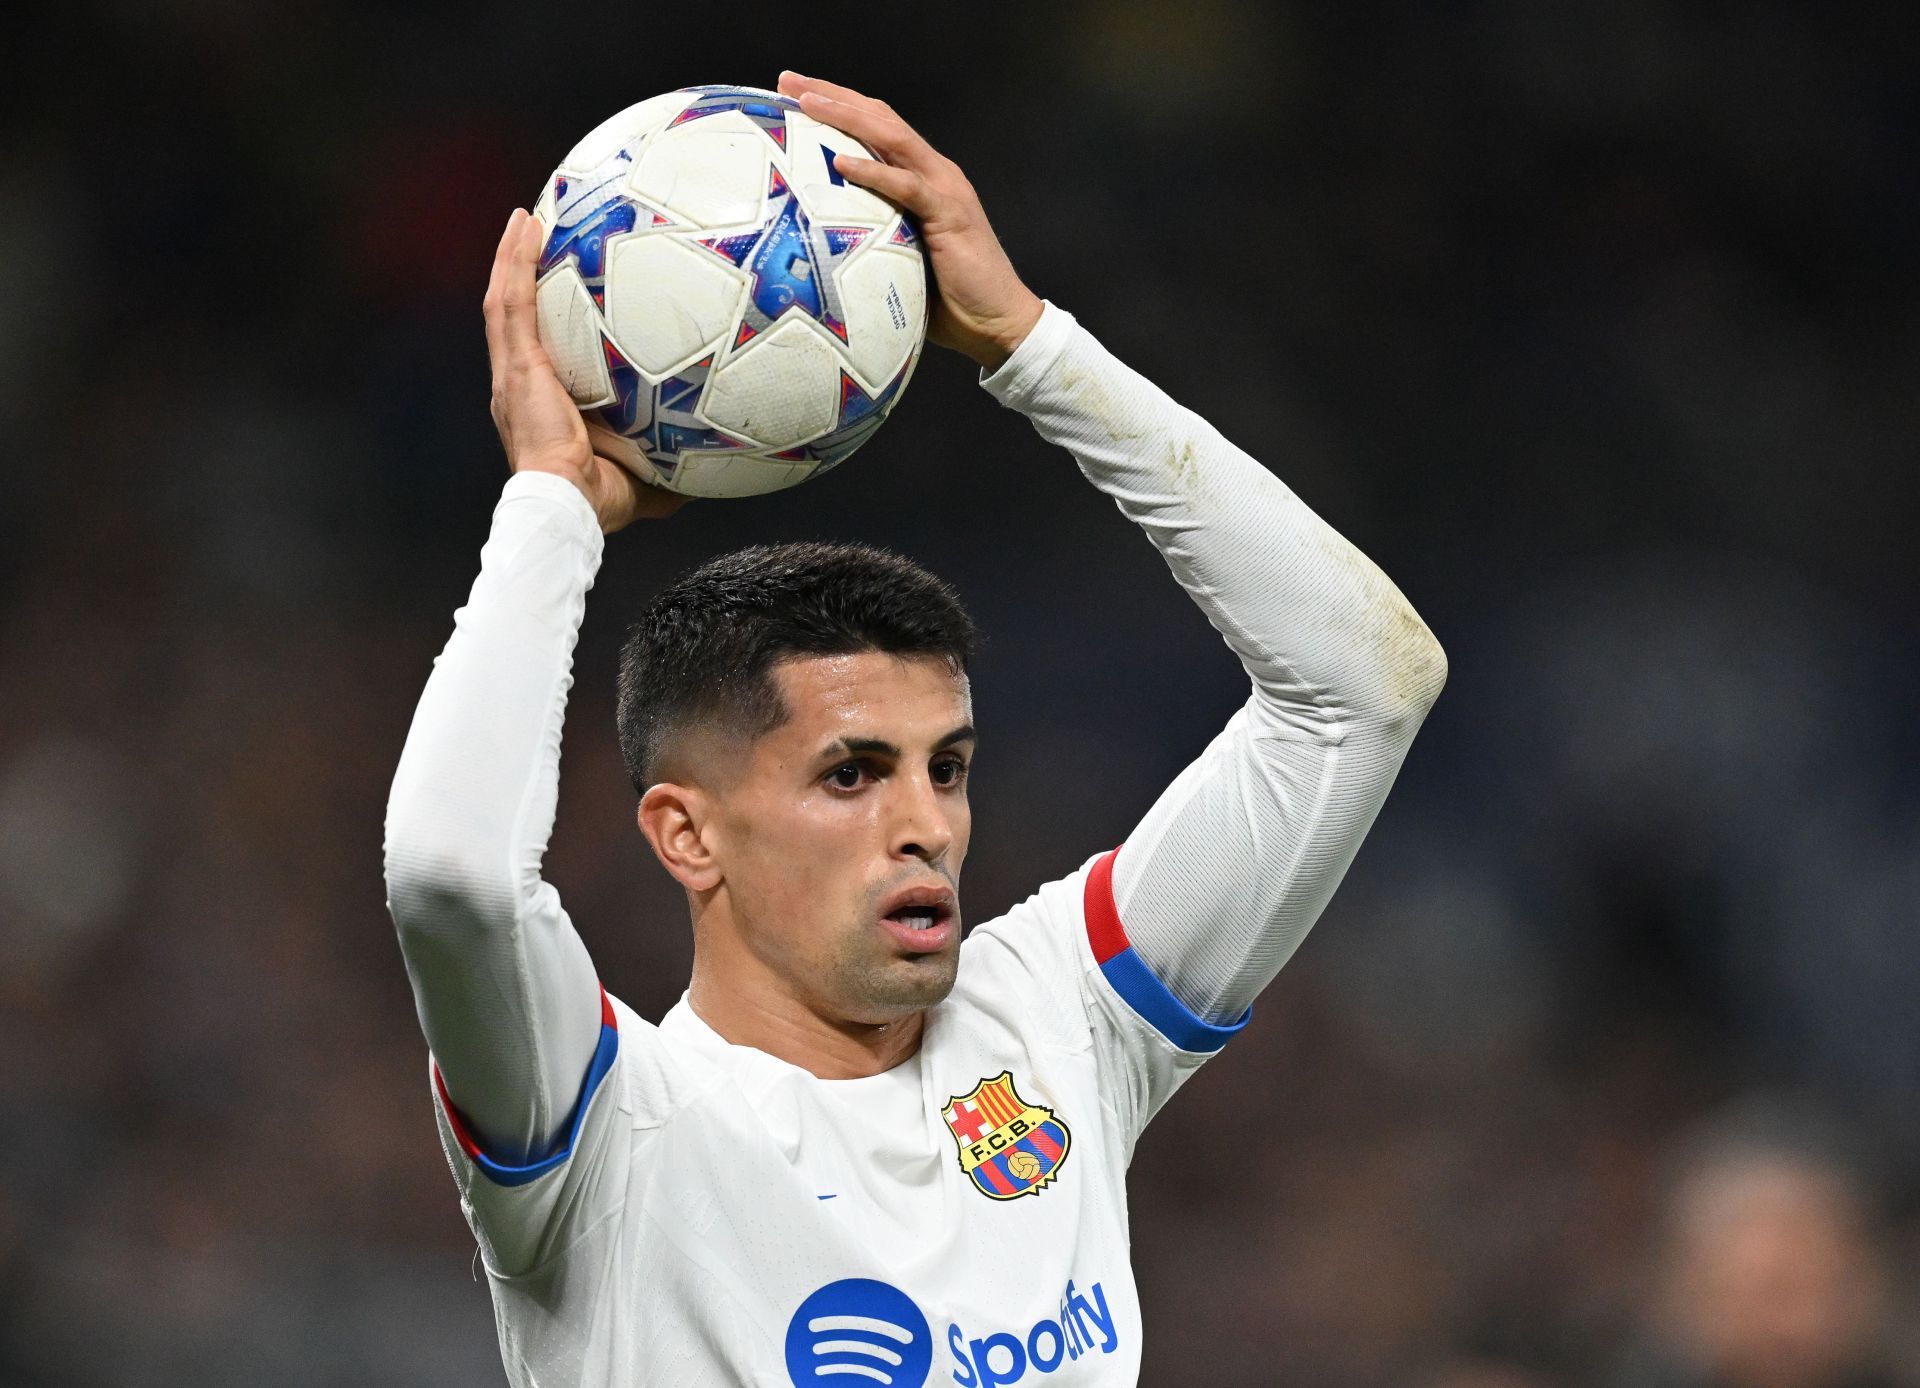 Joao Cancelo has been a revelation at the Camp Nou.